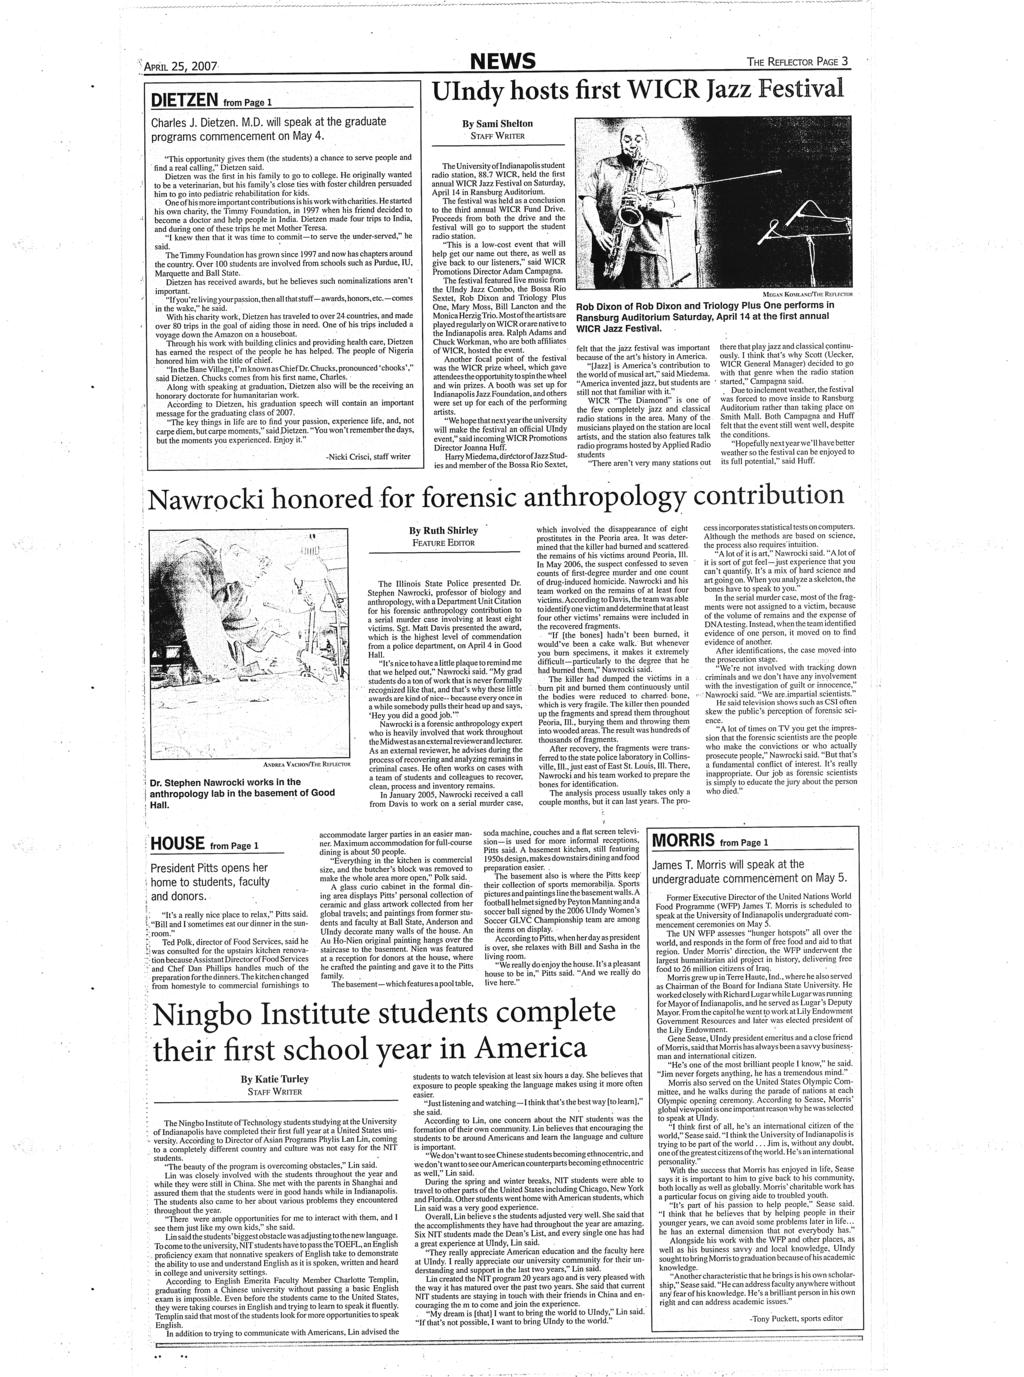 2 graduatng O = AP L 25 2007 NEWS THE REFLECTOR PAGE 3 DETZEN from Page Undy hosts frst WCR Jazz Festval Charles J Detzen MD wll speak at the graduate By Sam Shelton nwr /3 r programs commencement on